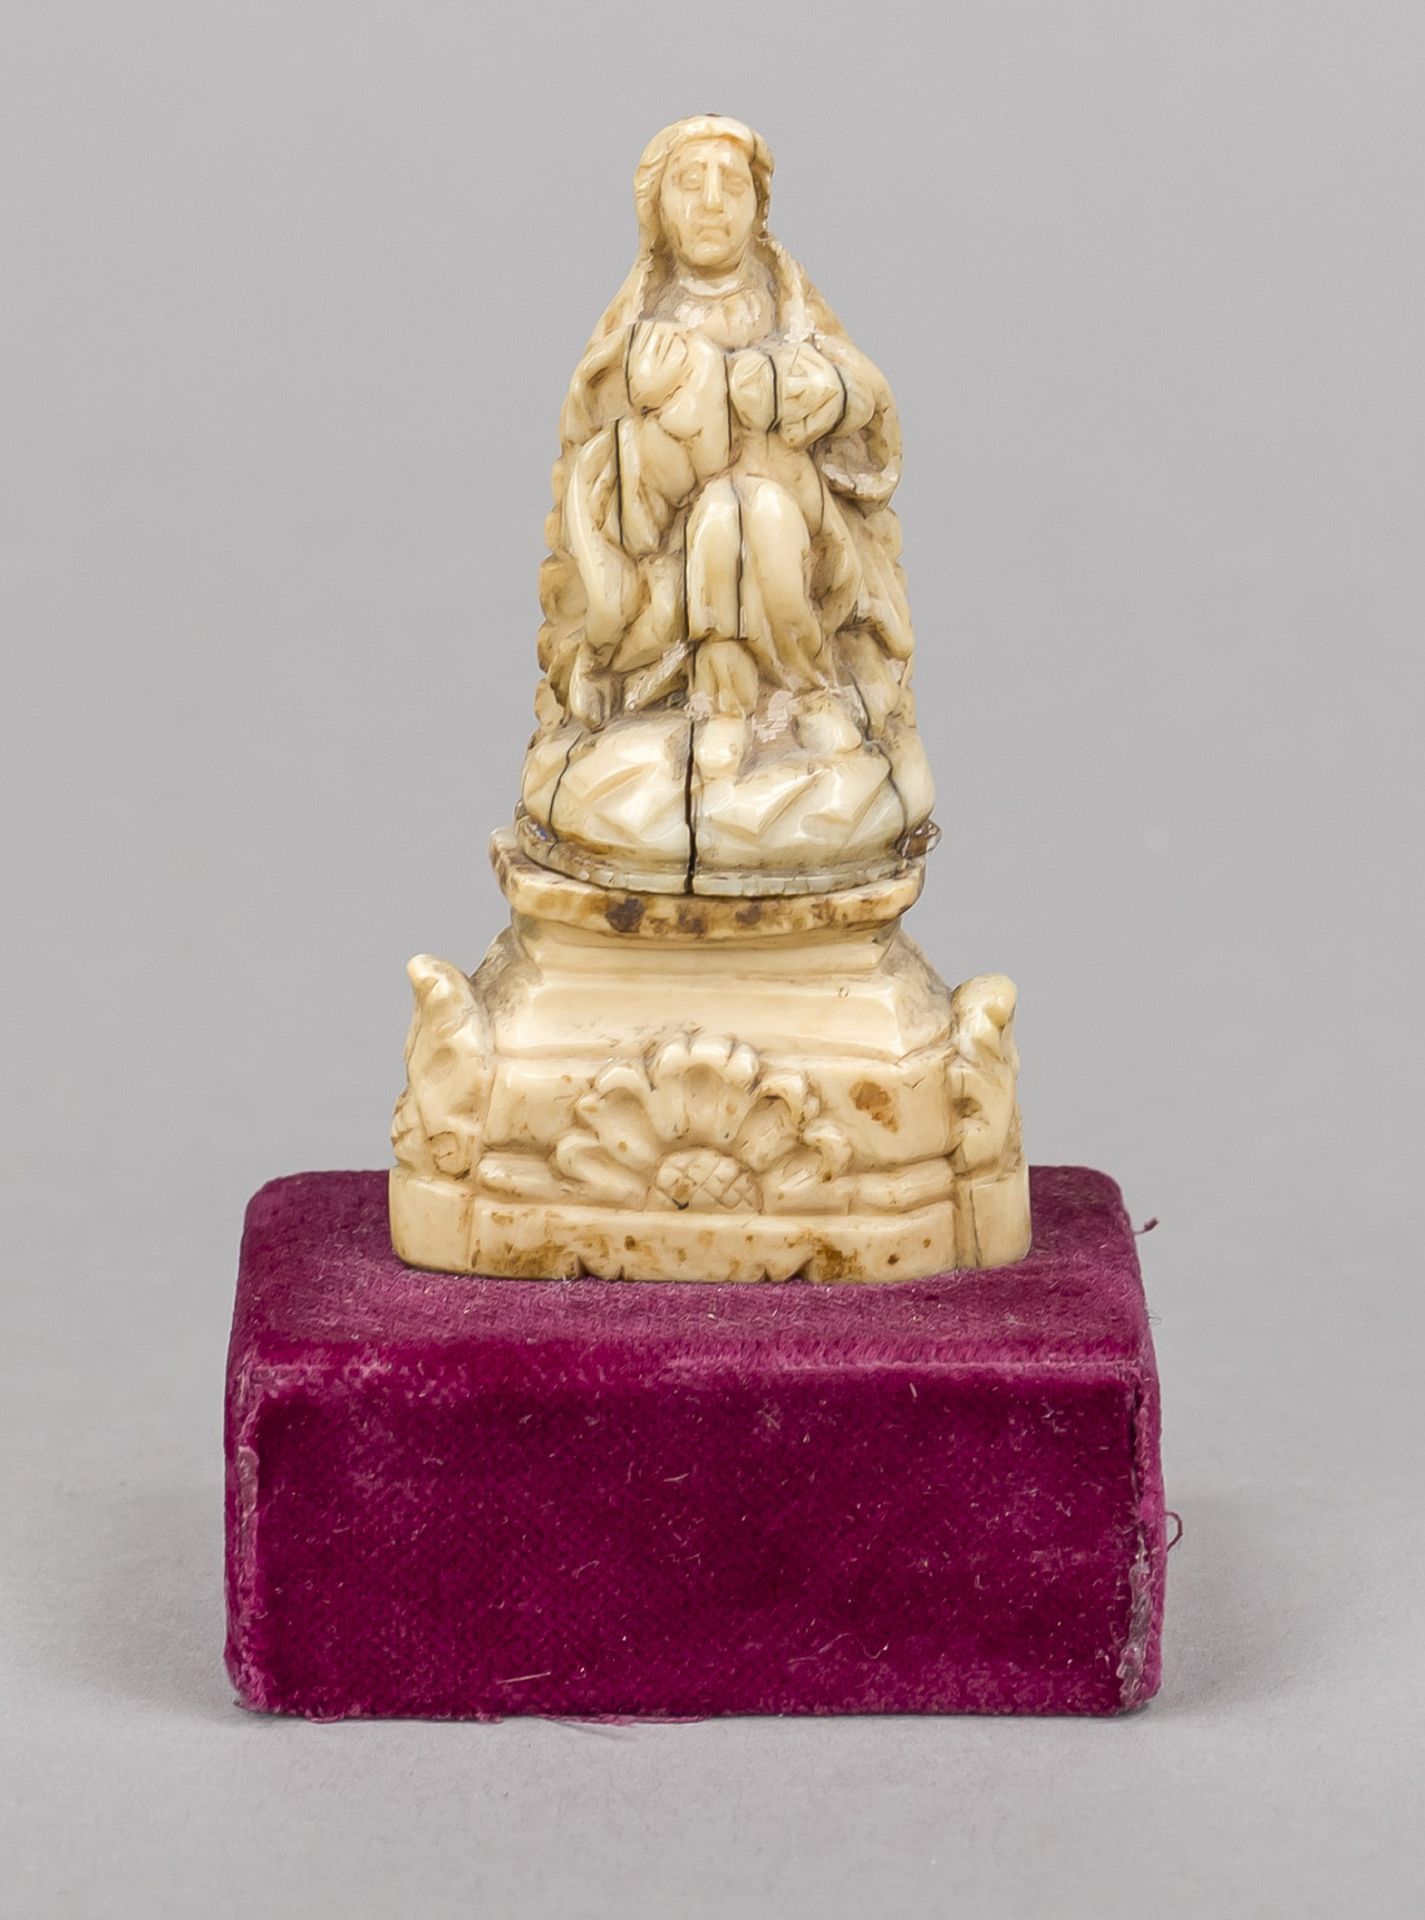 Small Madonna made of mammoth ivory, probably 18th century, probably fragment of a larger object.